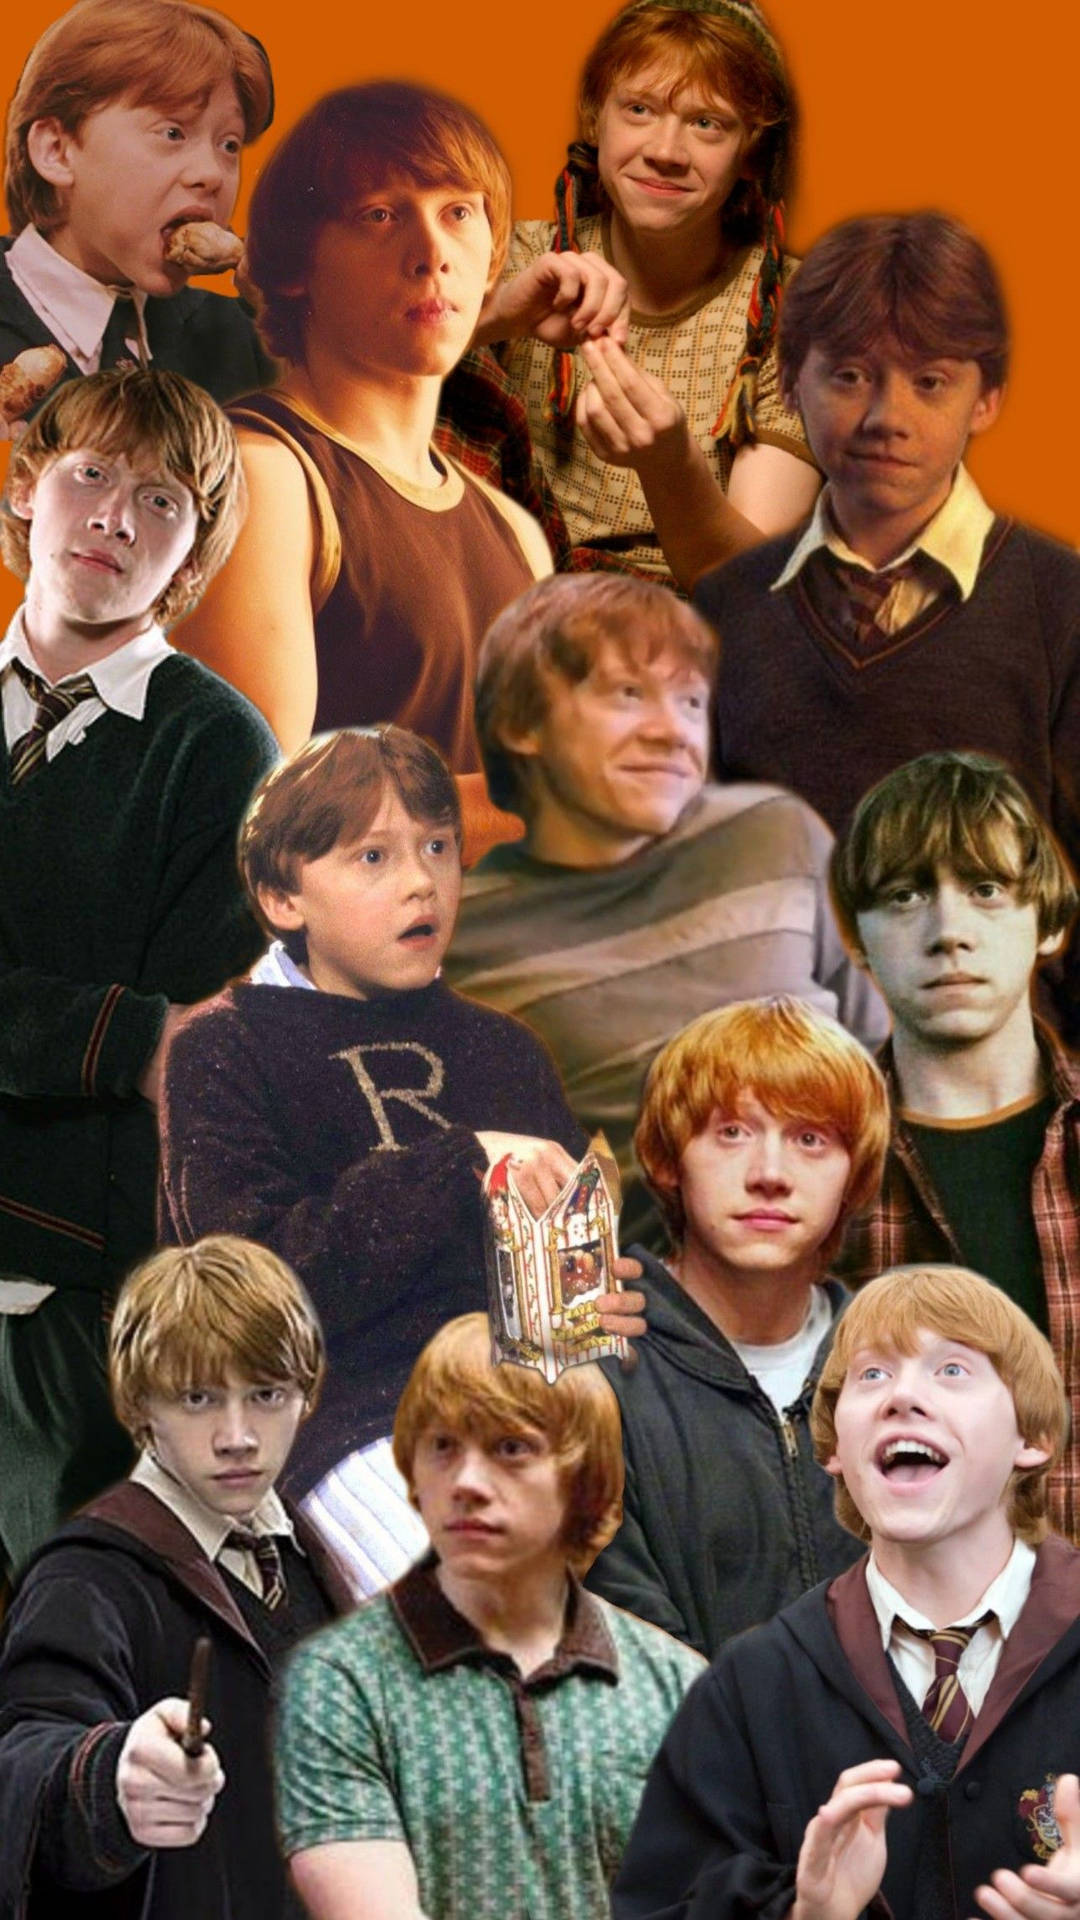 A Portrait Of Ron Weasley, The Loyal Friend And Loyal Gryffindor From The Harry Potter Series